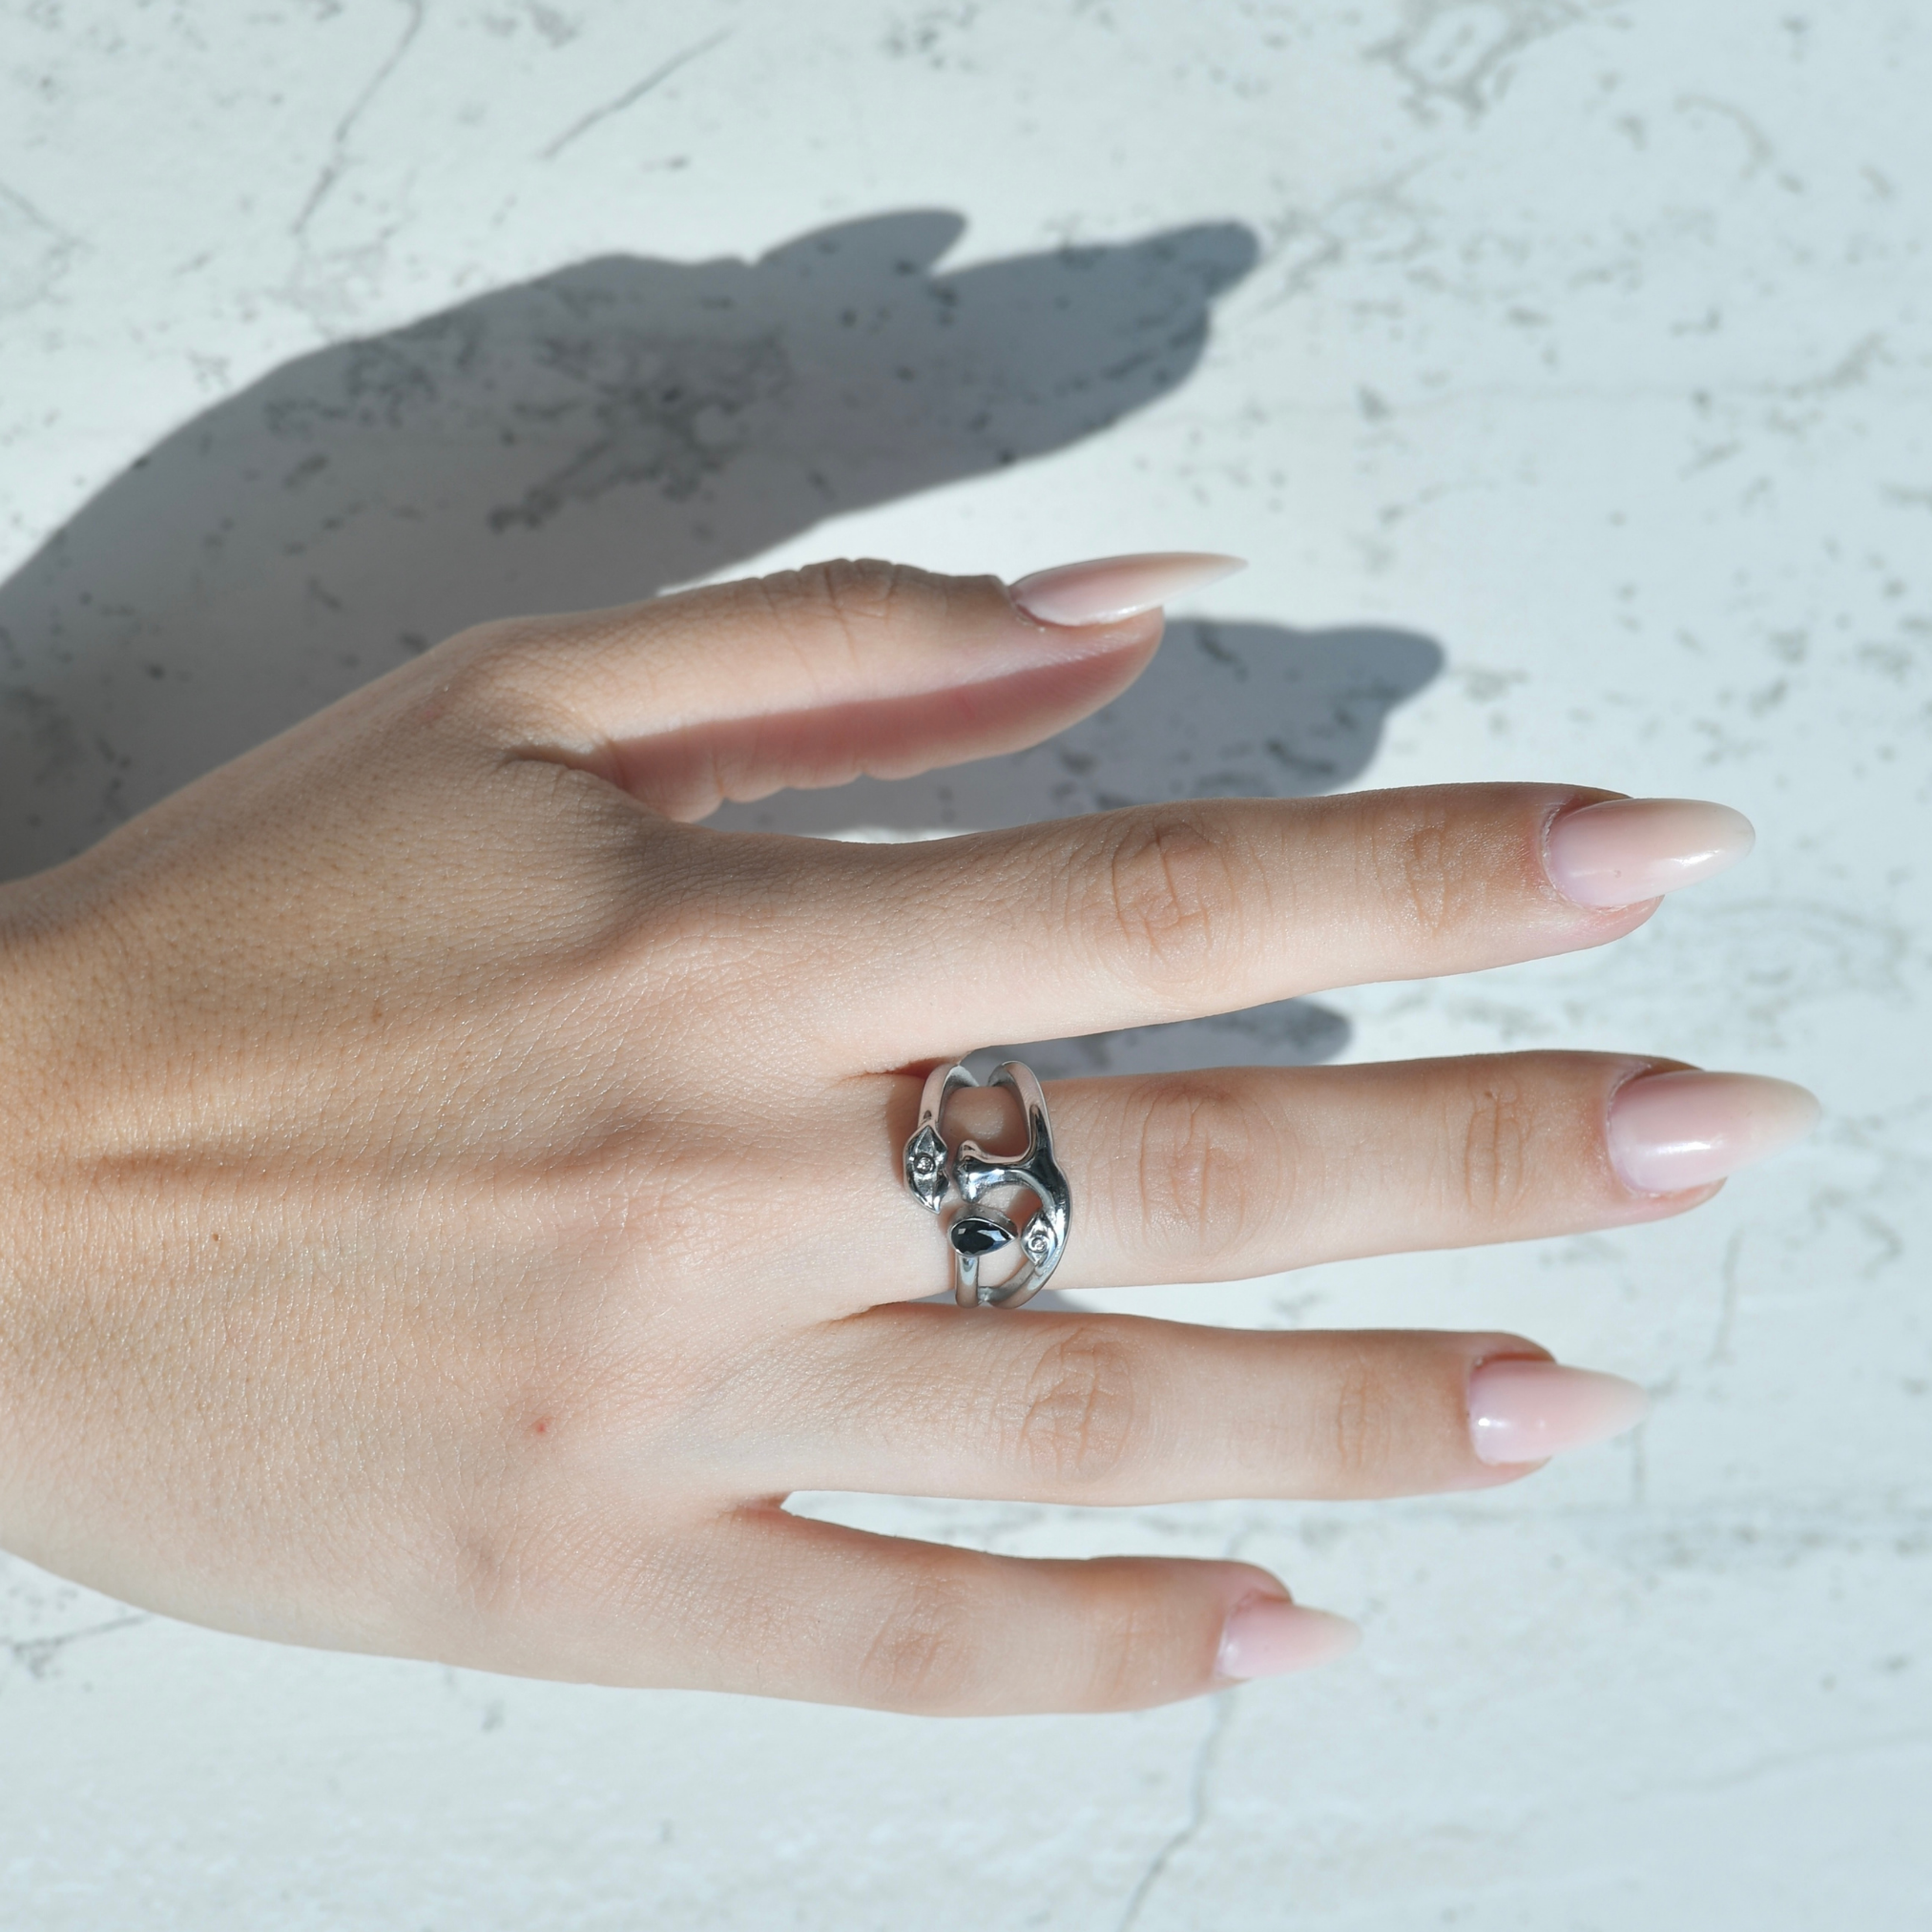 Her face silver zircon ring. Surreal silver ring with the shape of a face , eyes, noes, lips and a teardrop with a black zircon attached on the drop. In the lip and eye it has a small white zircon